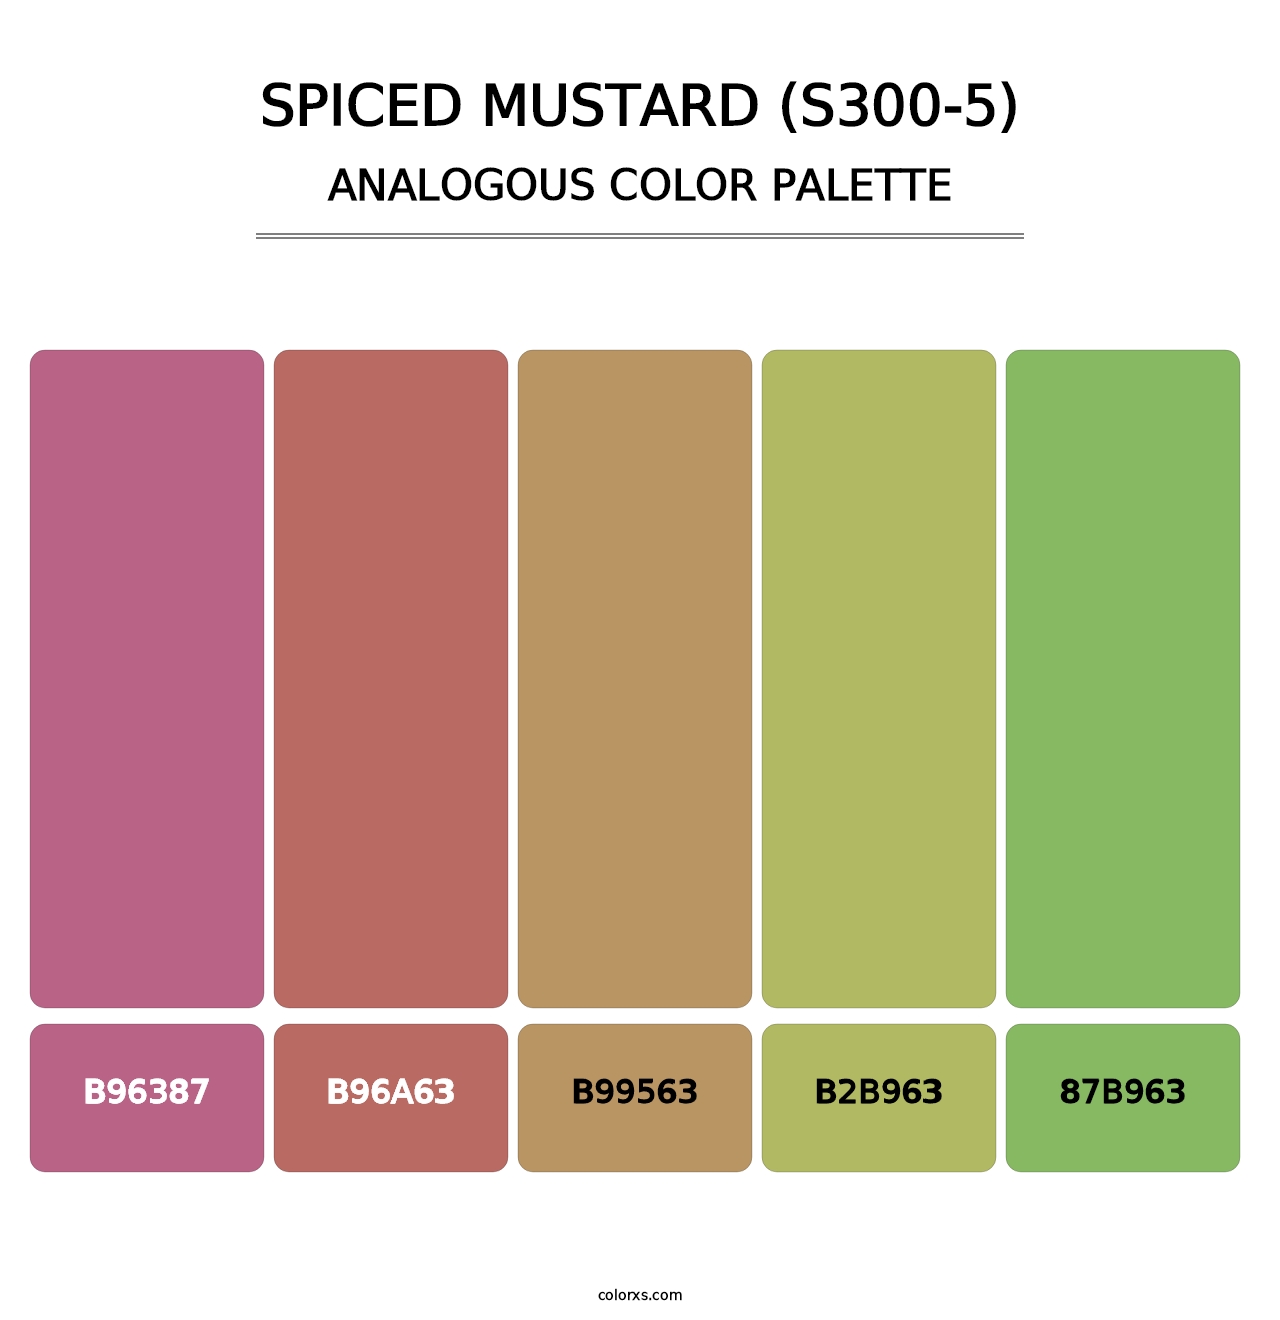 Spiced Mustard (S300-5) - Analogous Color Palette